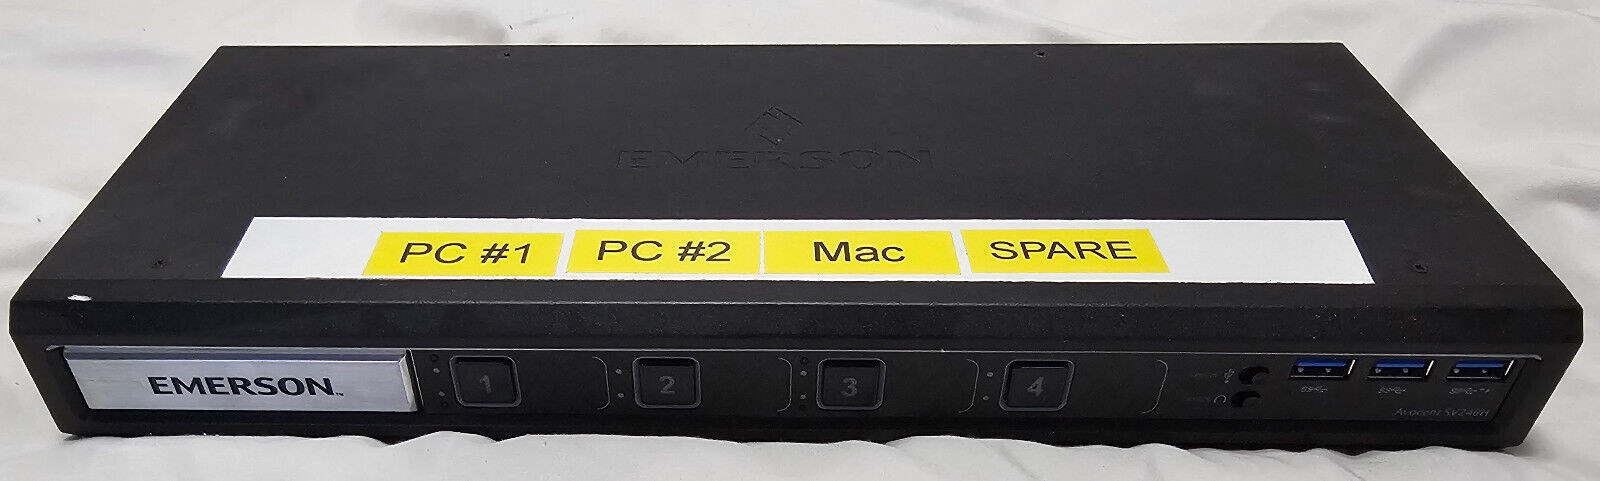 Emerson Avocent SV 4-Port HDMI KVM Switch (SV240H) with damaged audio out jack